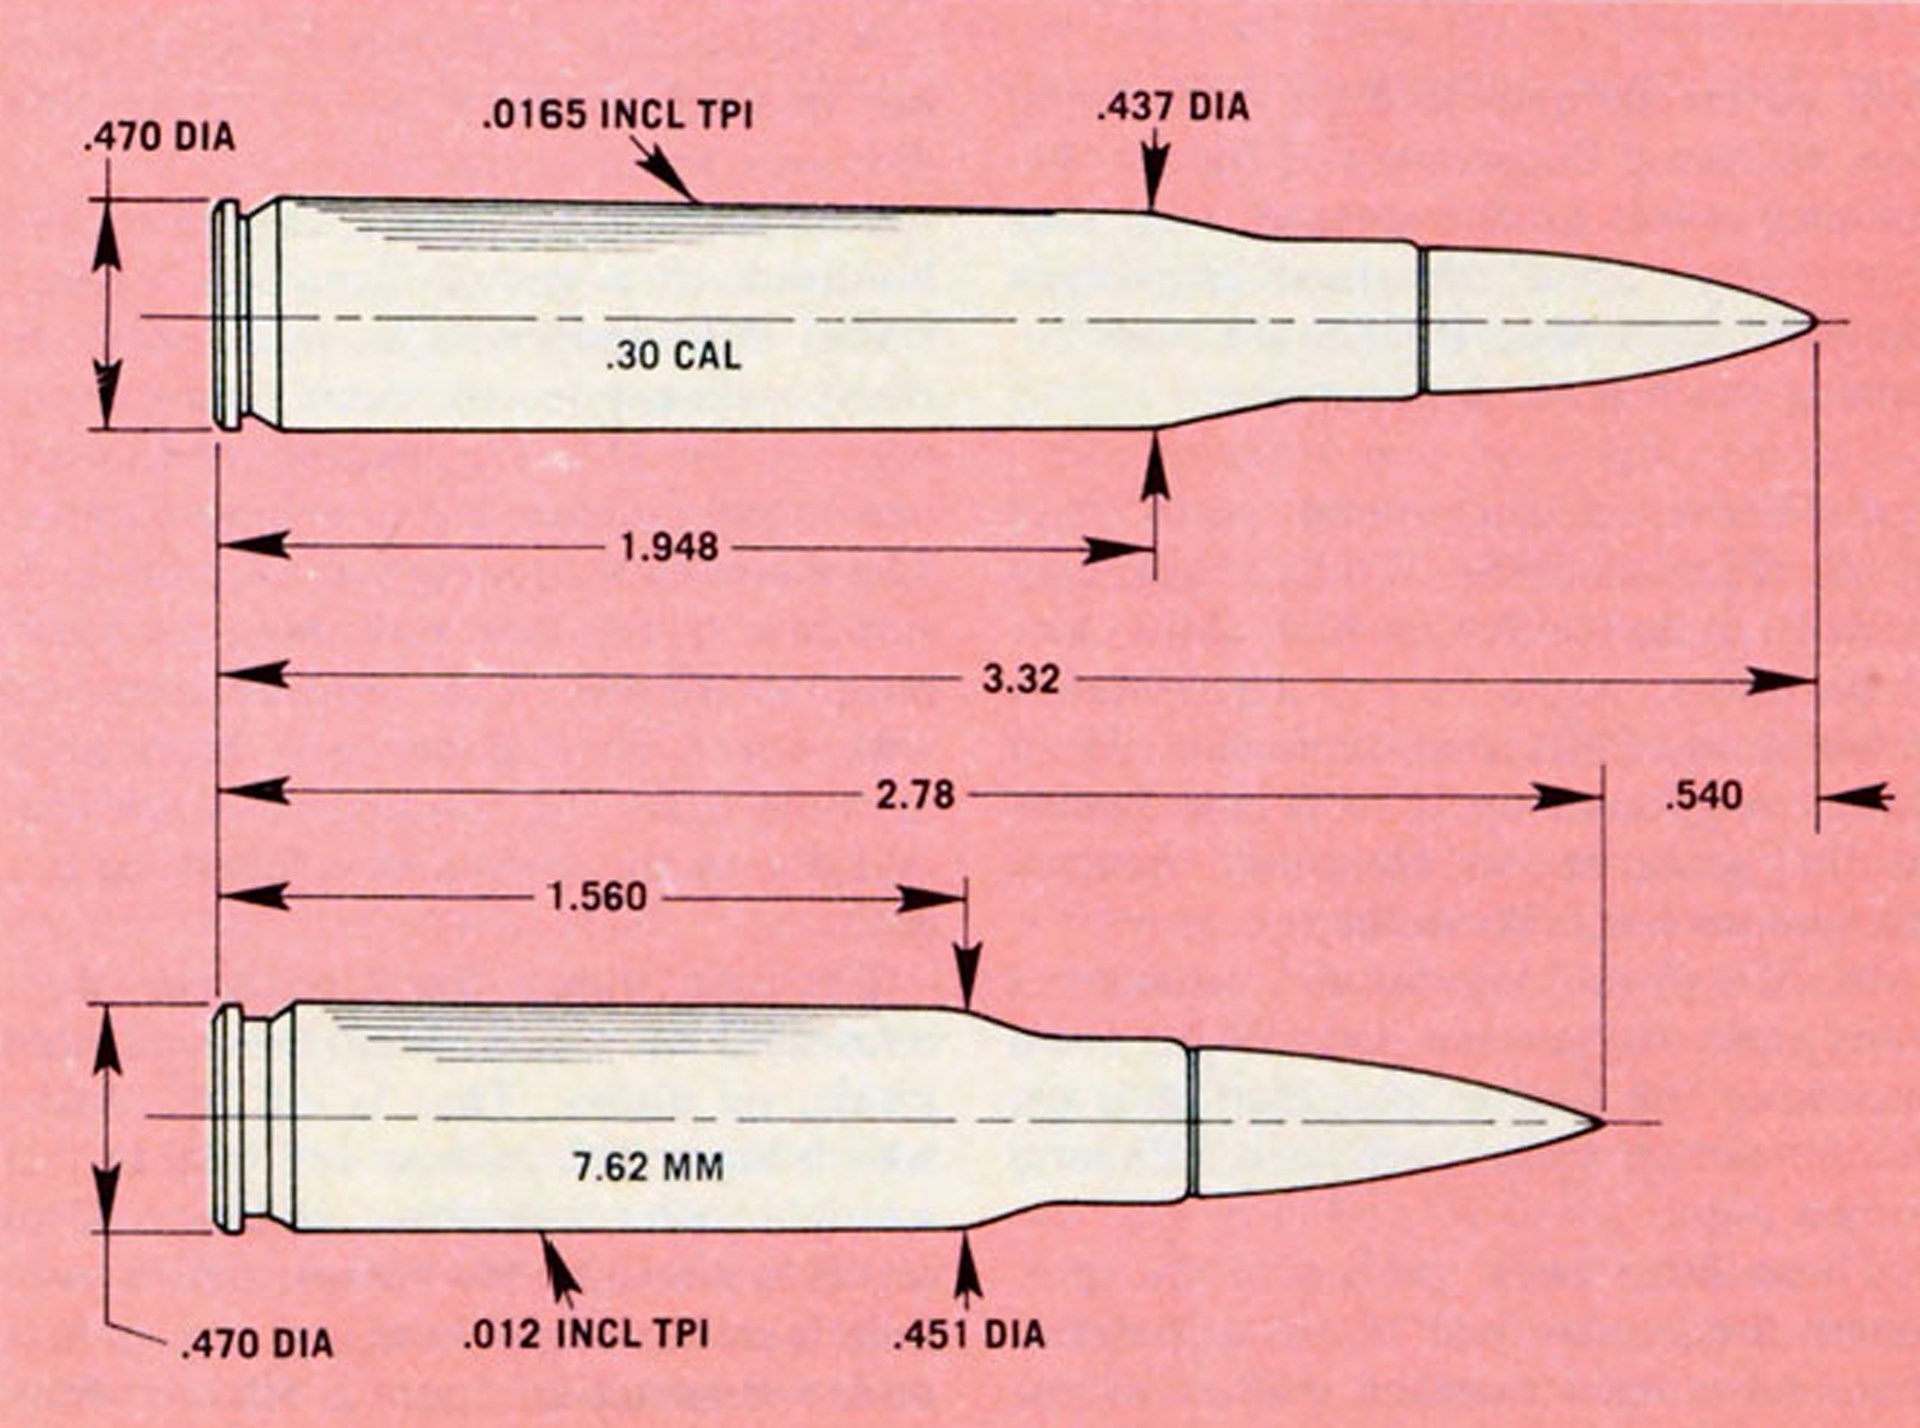 Cal. .30 and 7.62 mm NATO cartridge dimensions compared